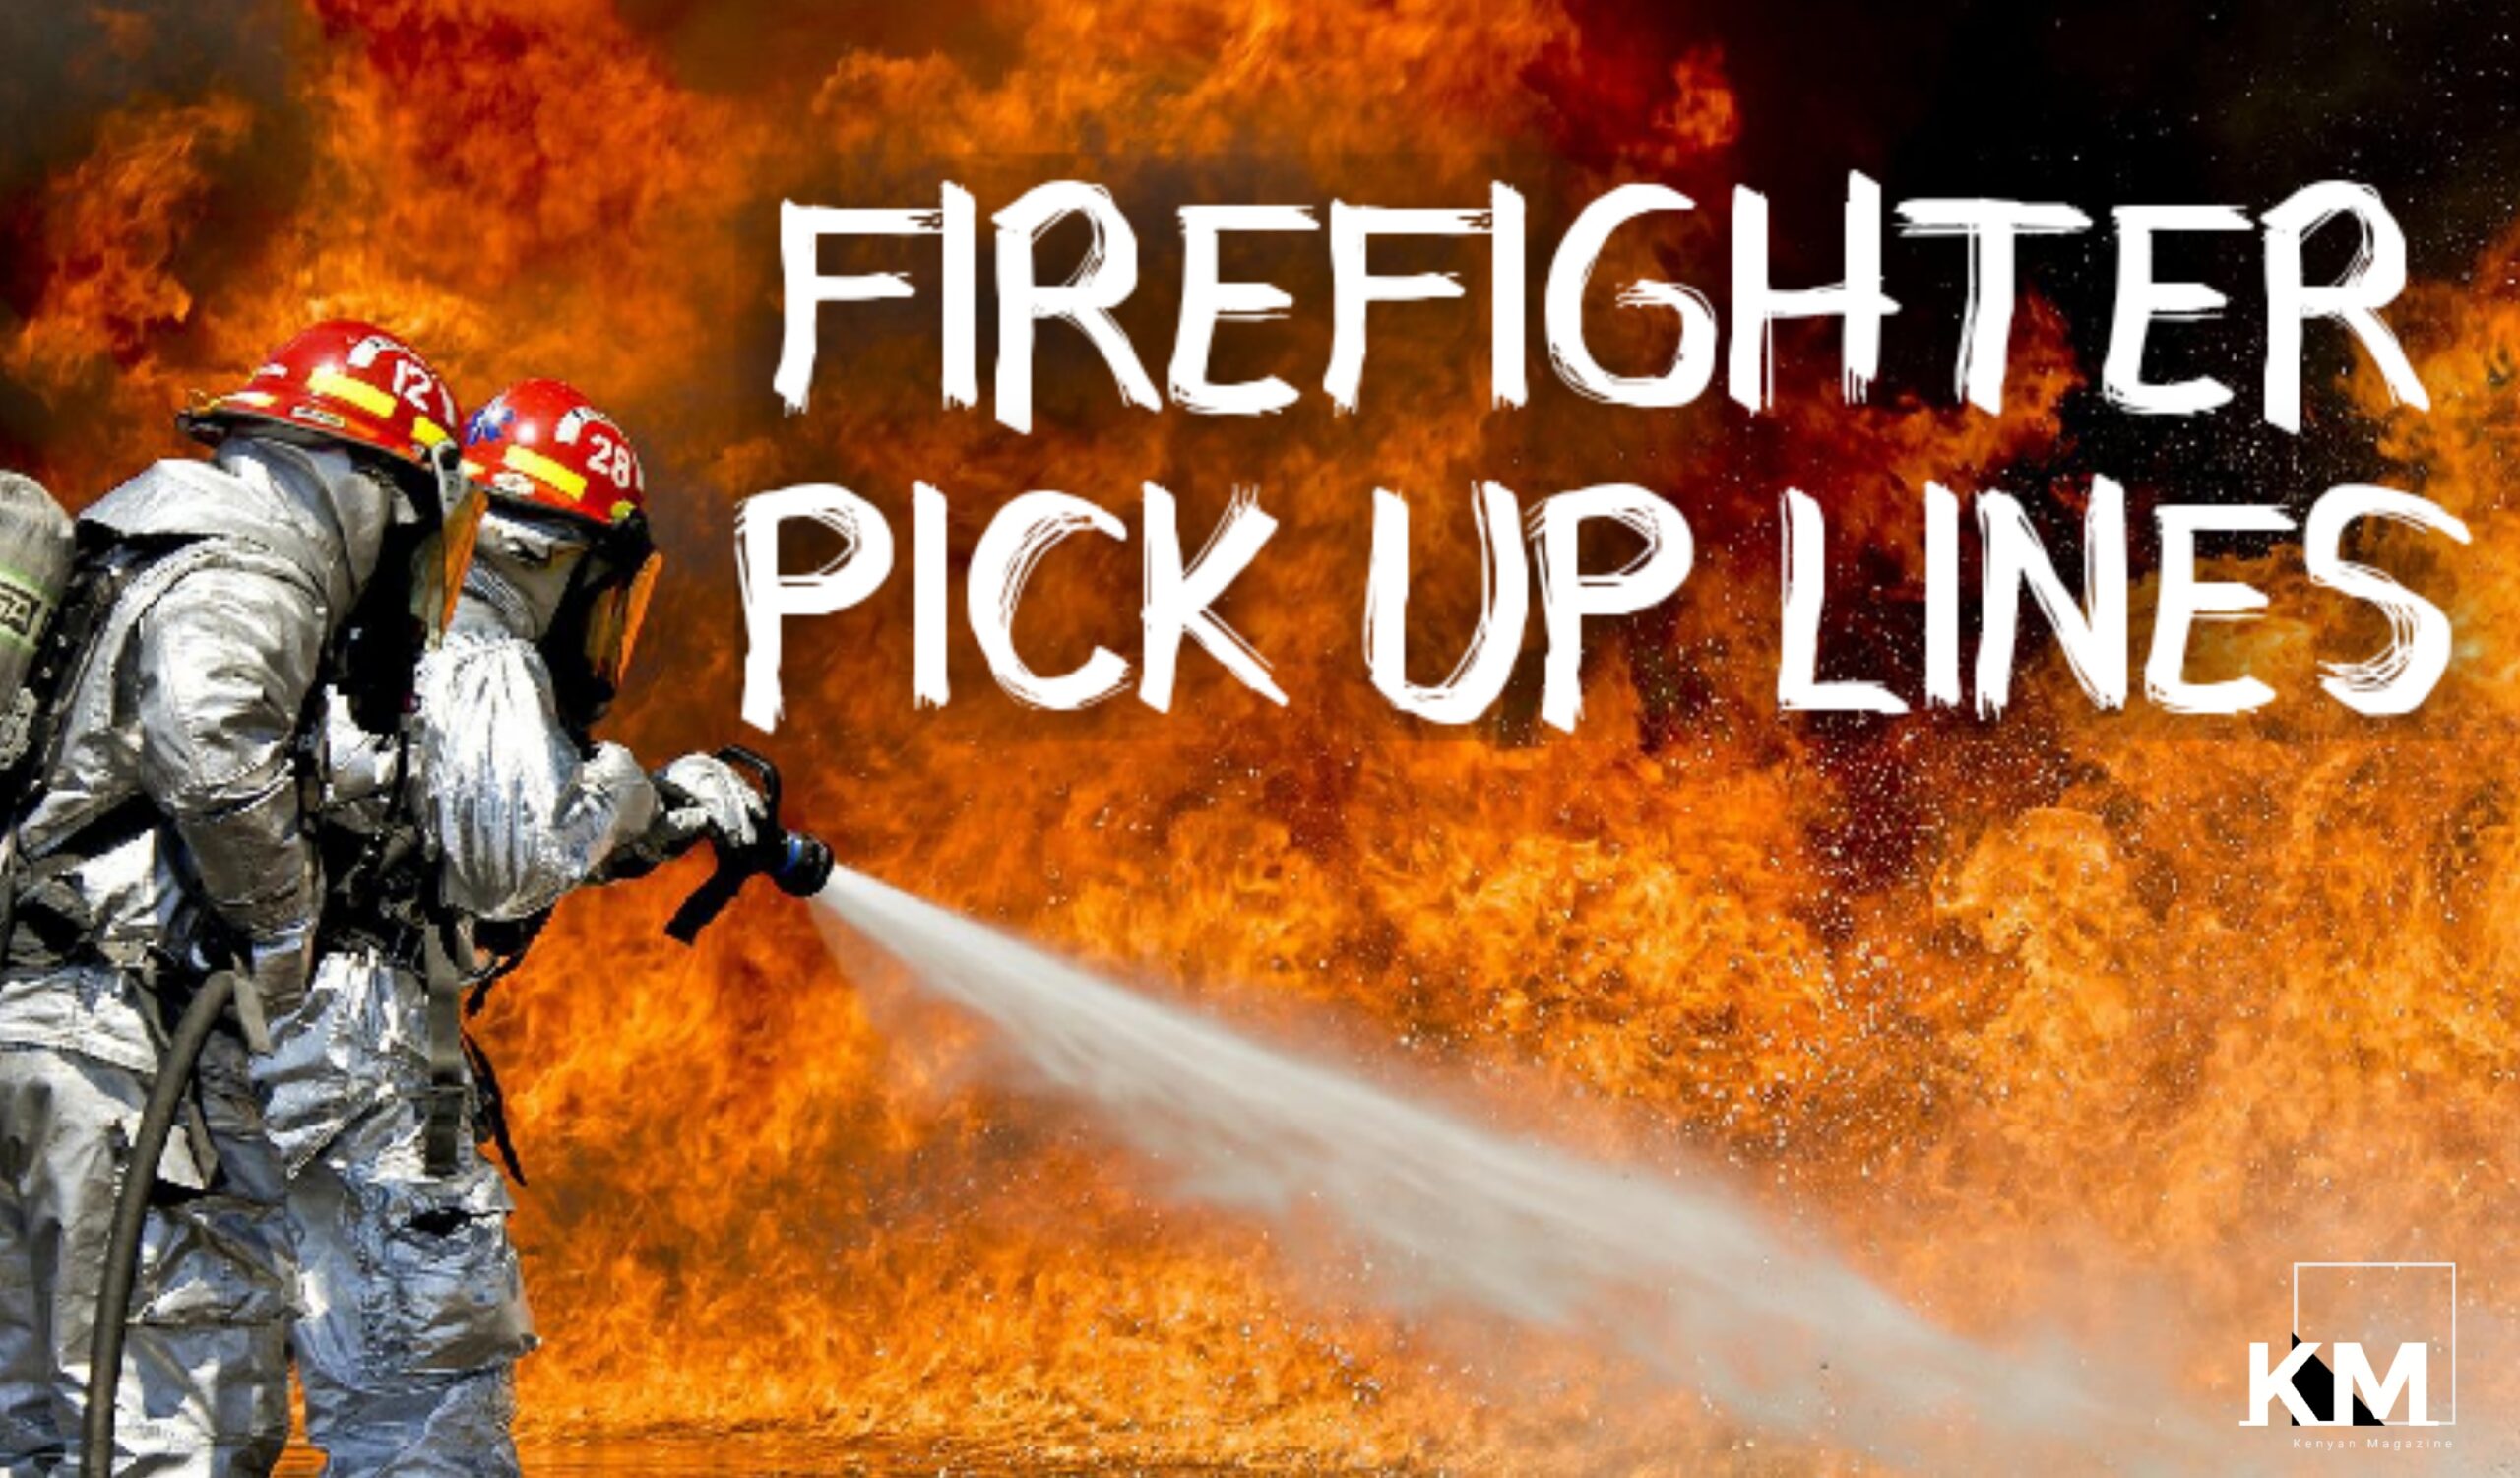 Firefighters Pick up lines